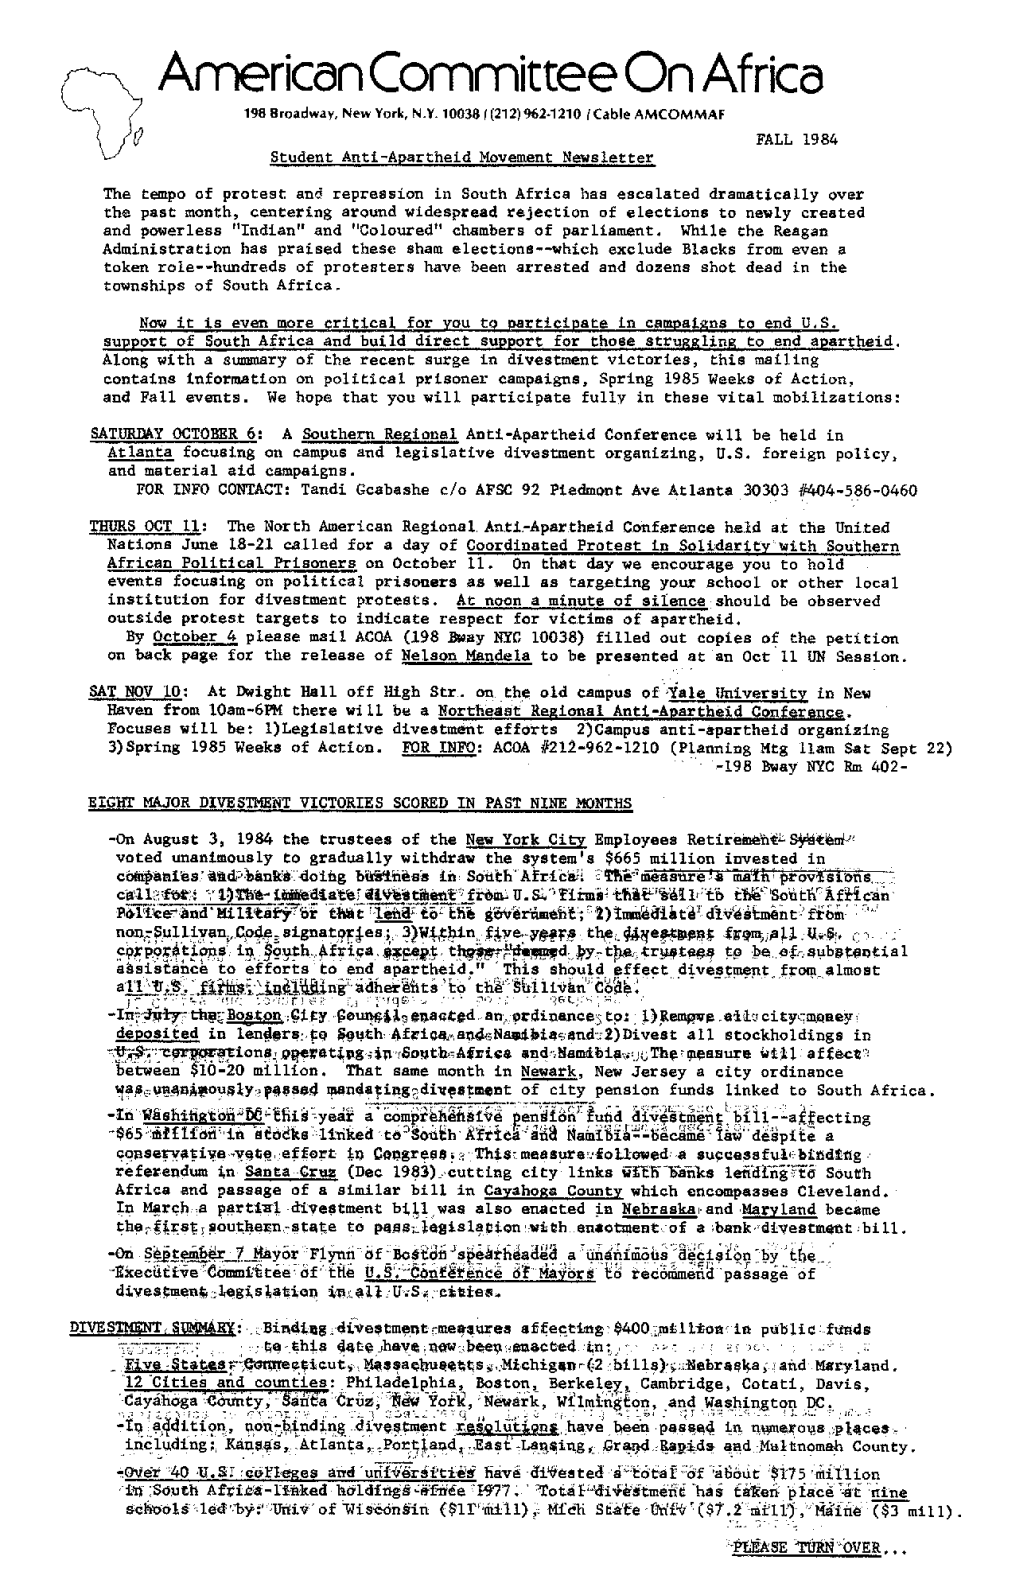 Camerican Committee on Africafall 1984 Student Anti-Apartheid Movement Newsletter